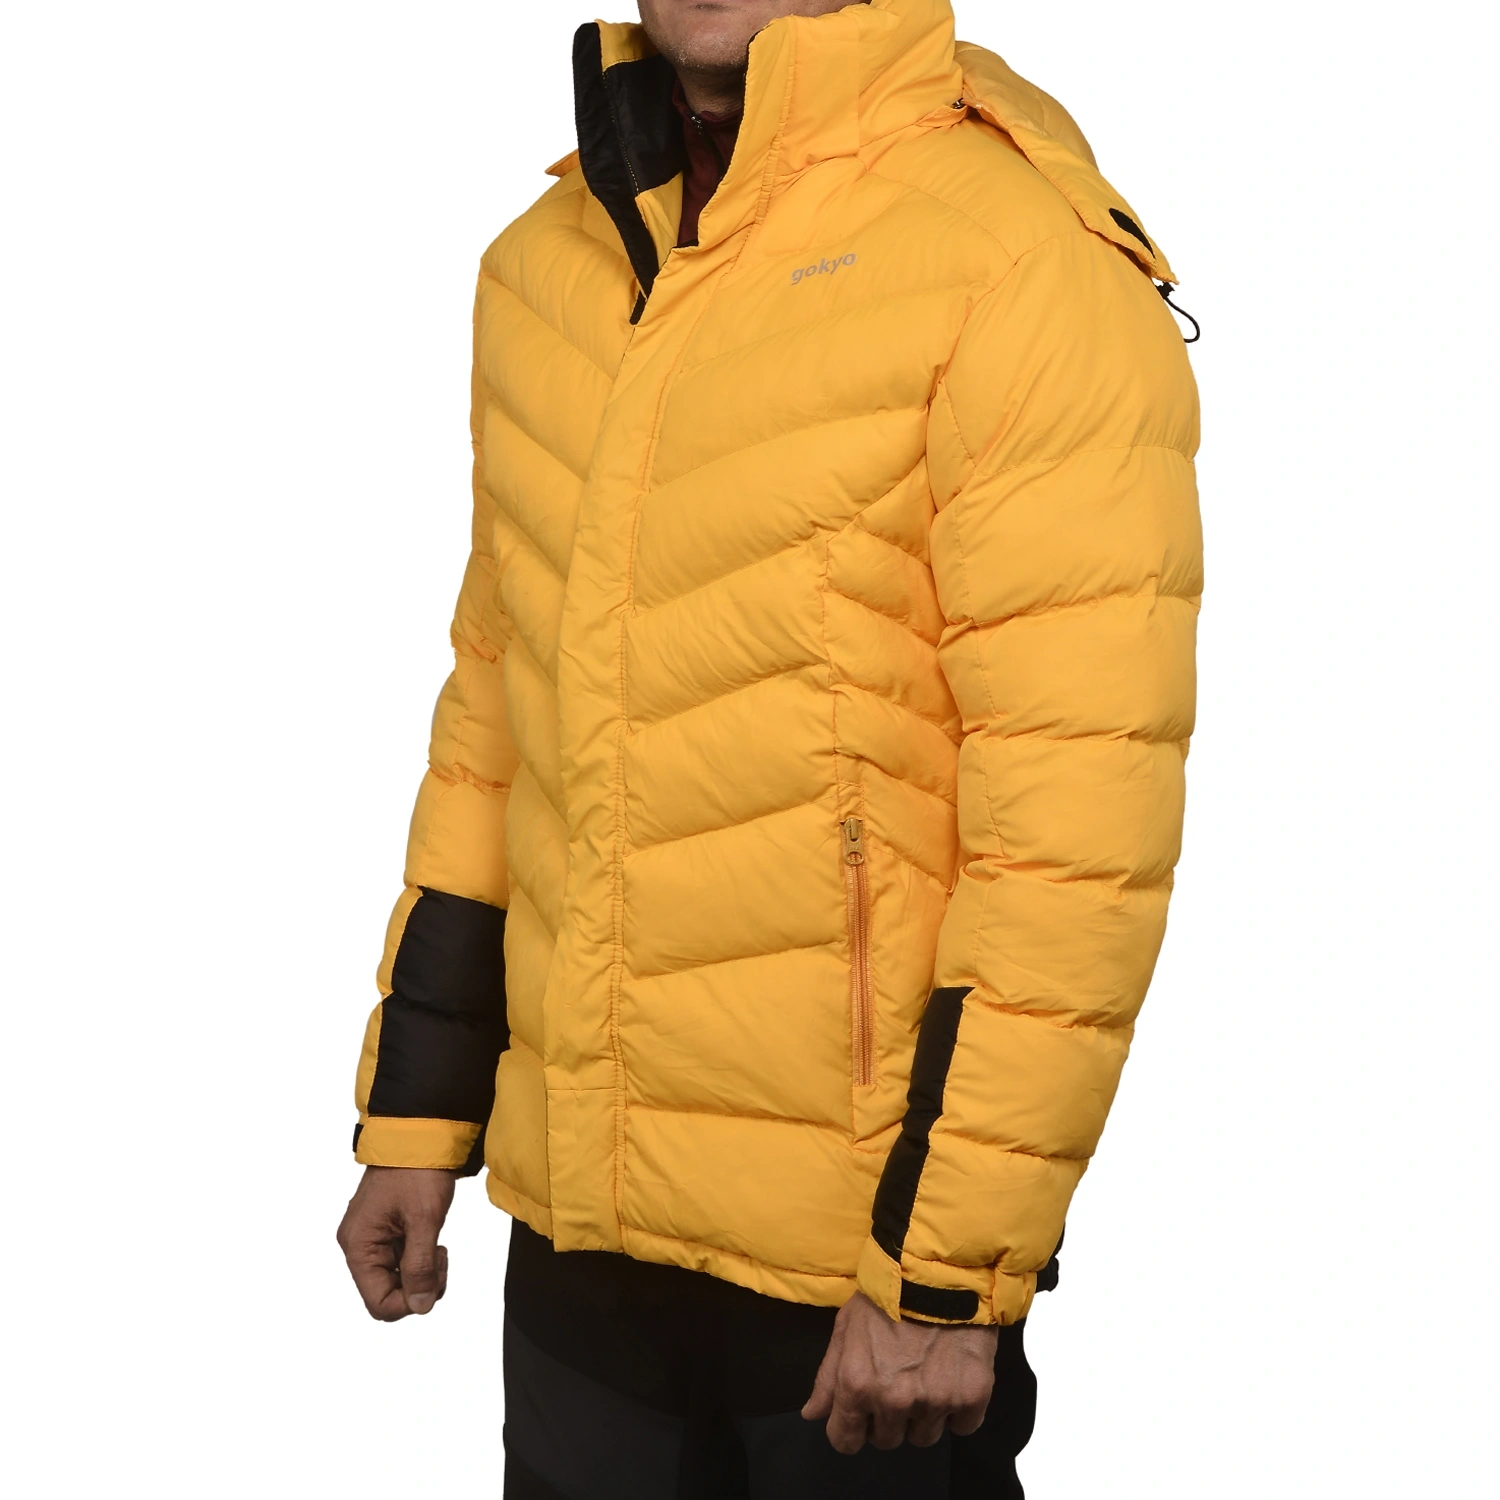 K2 Survivor Down Jacket for Men: Stylized Functionality for Extreme Cold Weather Expeditions (Up to -20°C)-S-Yellow-2